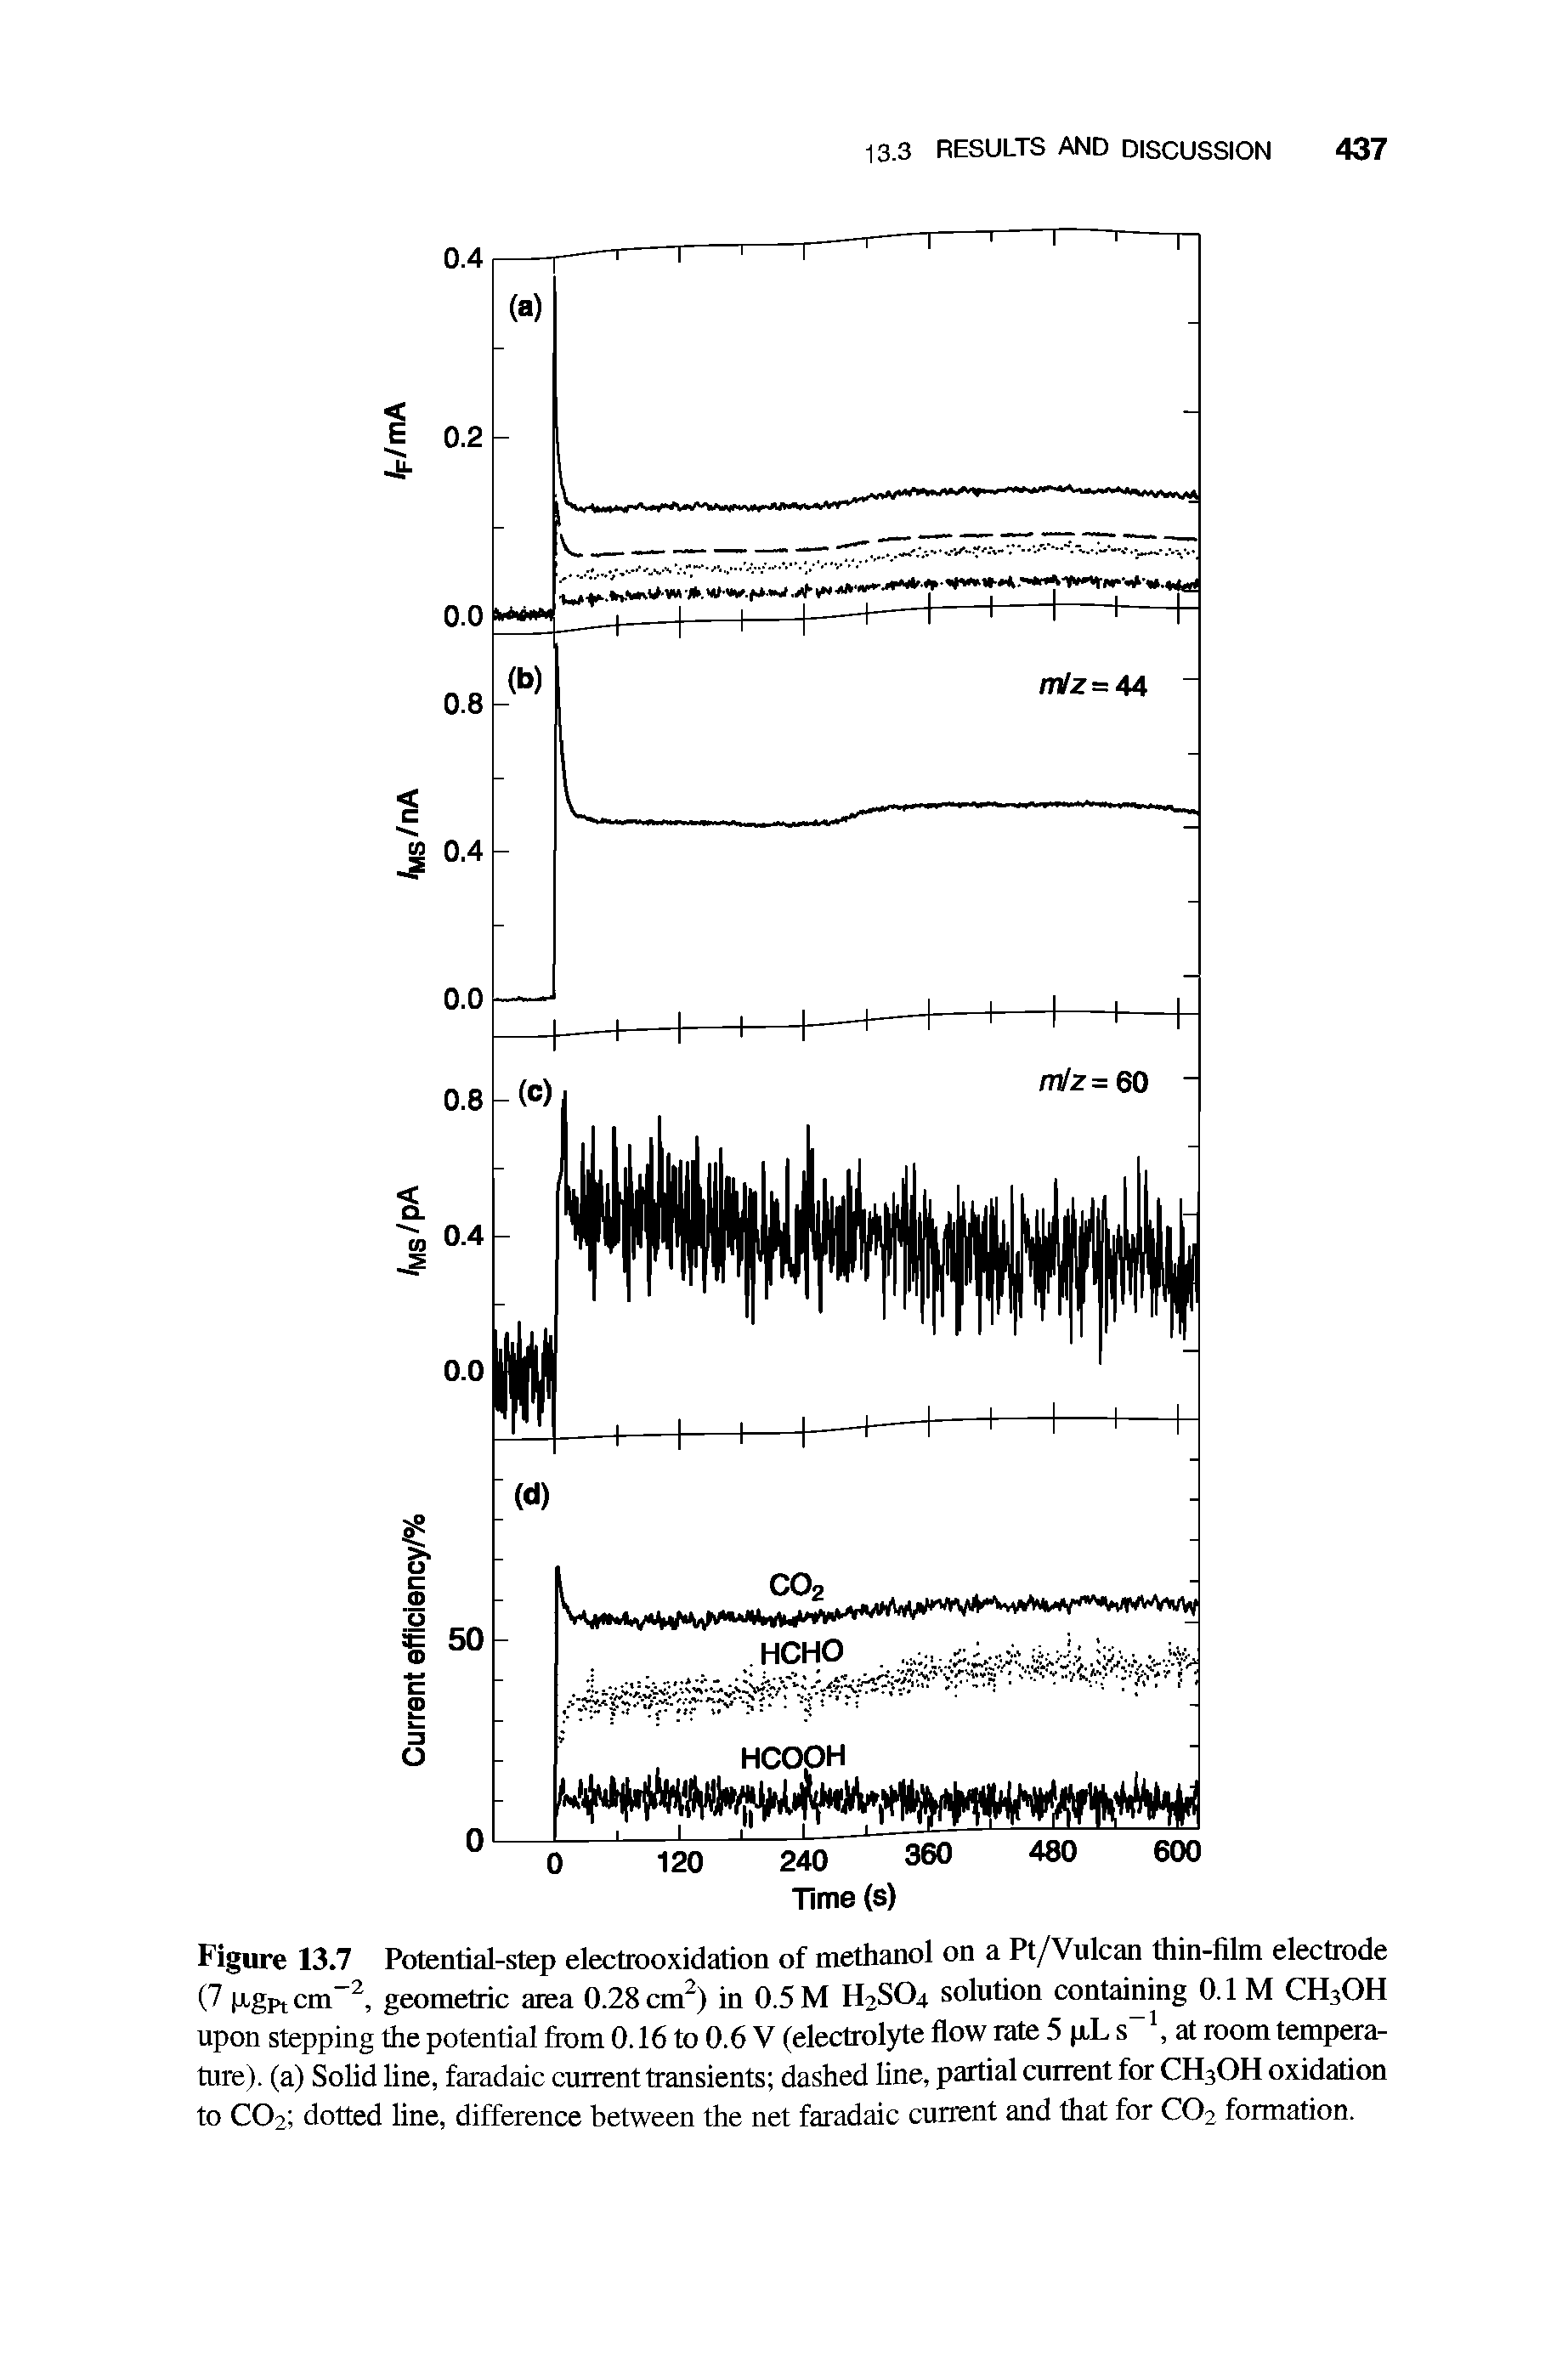 Figure 13.7 Potential-step electrooxidation of methanol on a Pt/Vulcan thin-film electrode (7 ixgptcm , geometric area 0.28 cm ) in 0.5 M H2SO4 solution containing 0.1 M CH3OH upon stepping the potential from 0.16 to 0.6 V (electrol3de flow rate 5 p,L s at room temperature). (a) Solid line, faradaic current transients dashed line, partial current for CH3OH oxidation to CO2 dotted line, difference between the net faradaic current and that for CO2 formation.